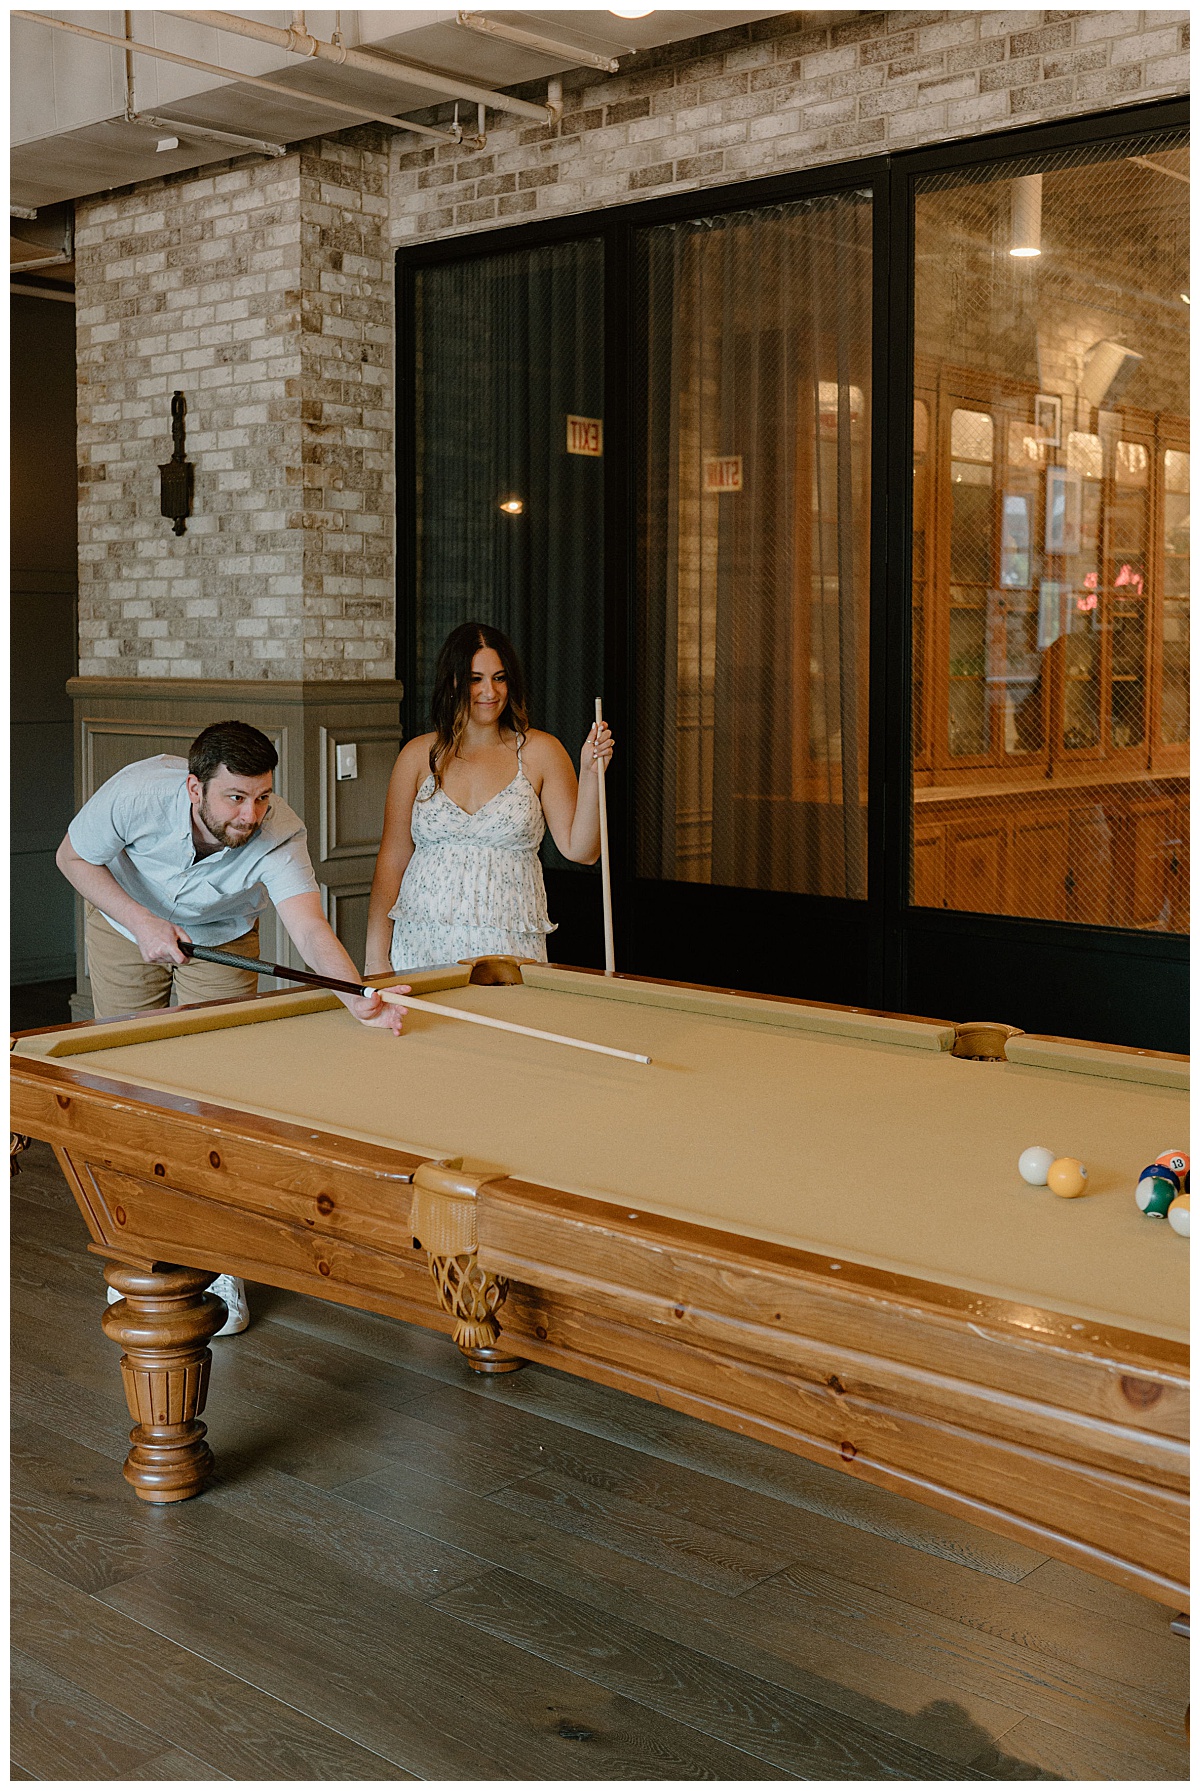 guy leans over pool table as girl watches by Chicago wedding photographer